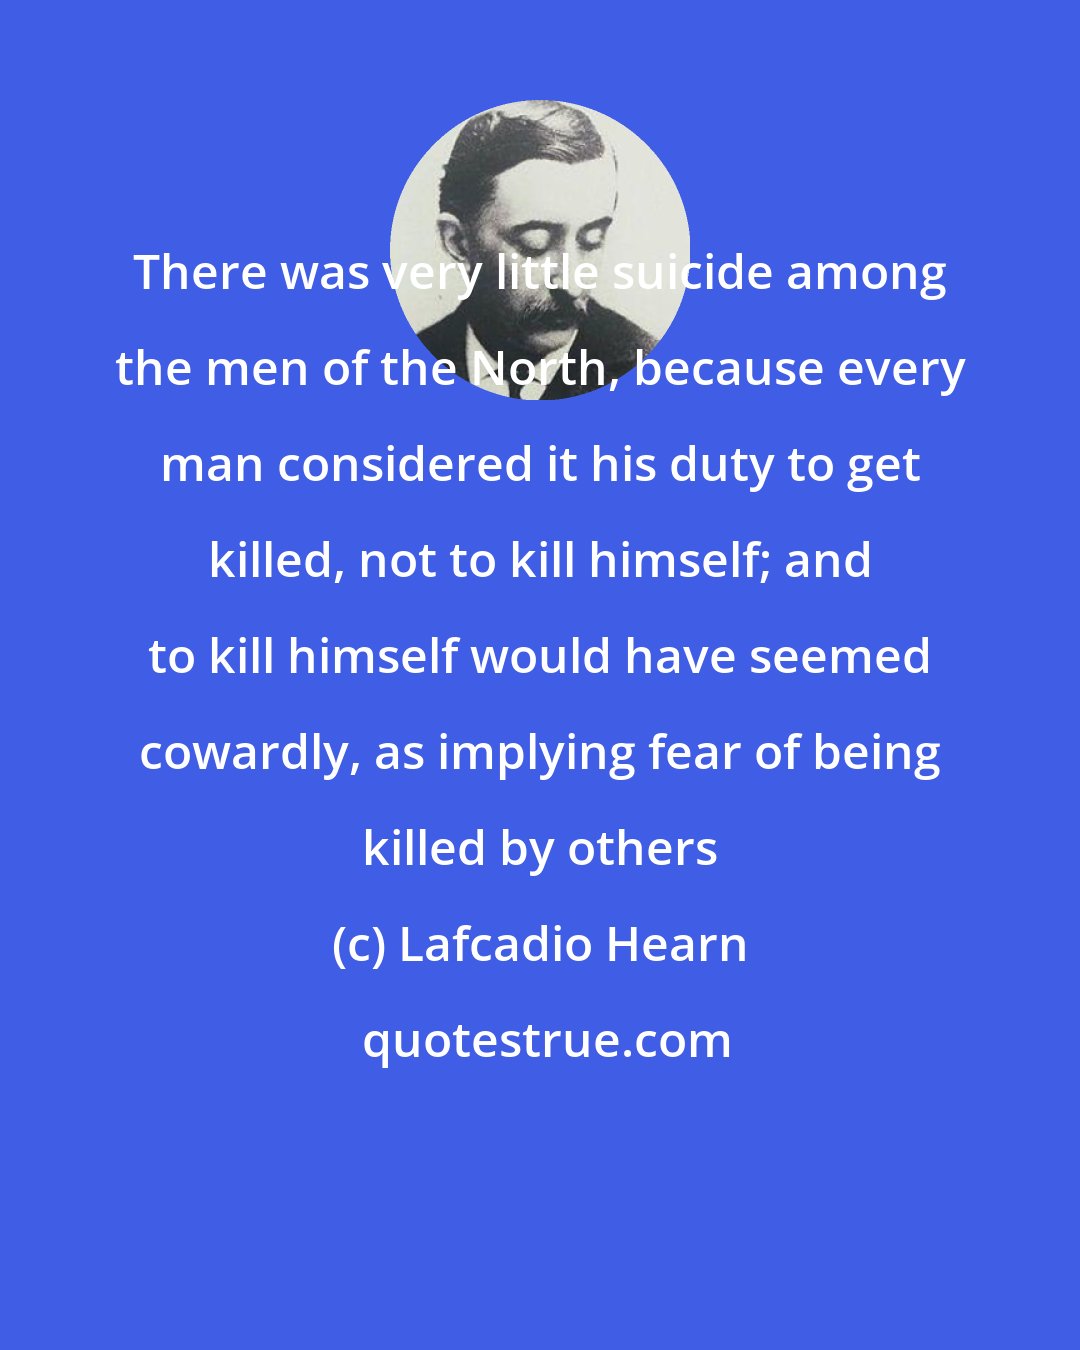 Lafcadio Hearn: There was very little suicide among the men of the North, because every man considered it his duty to get killed, not to kill himself; and to kill himself would have seemed cowardly, as implying fear of being killed by others